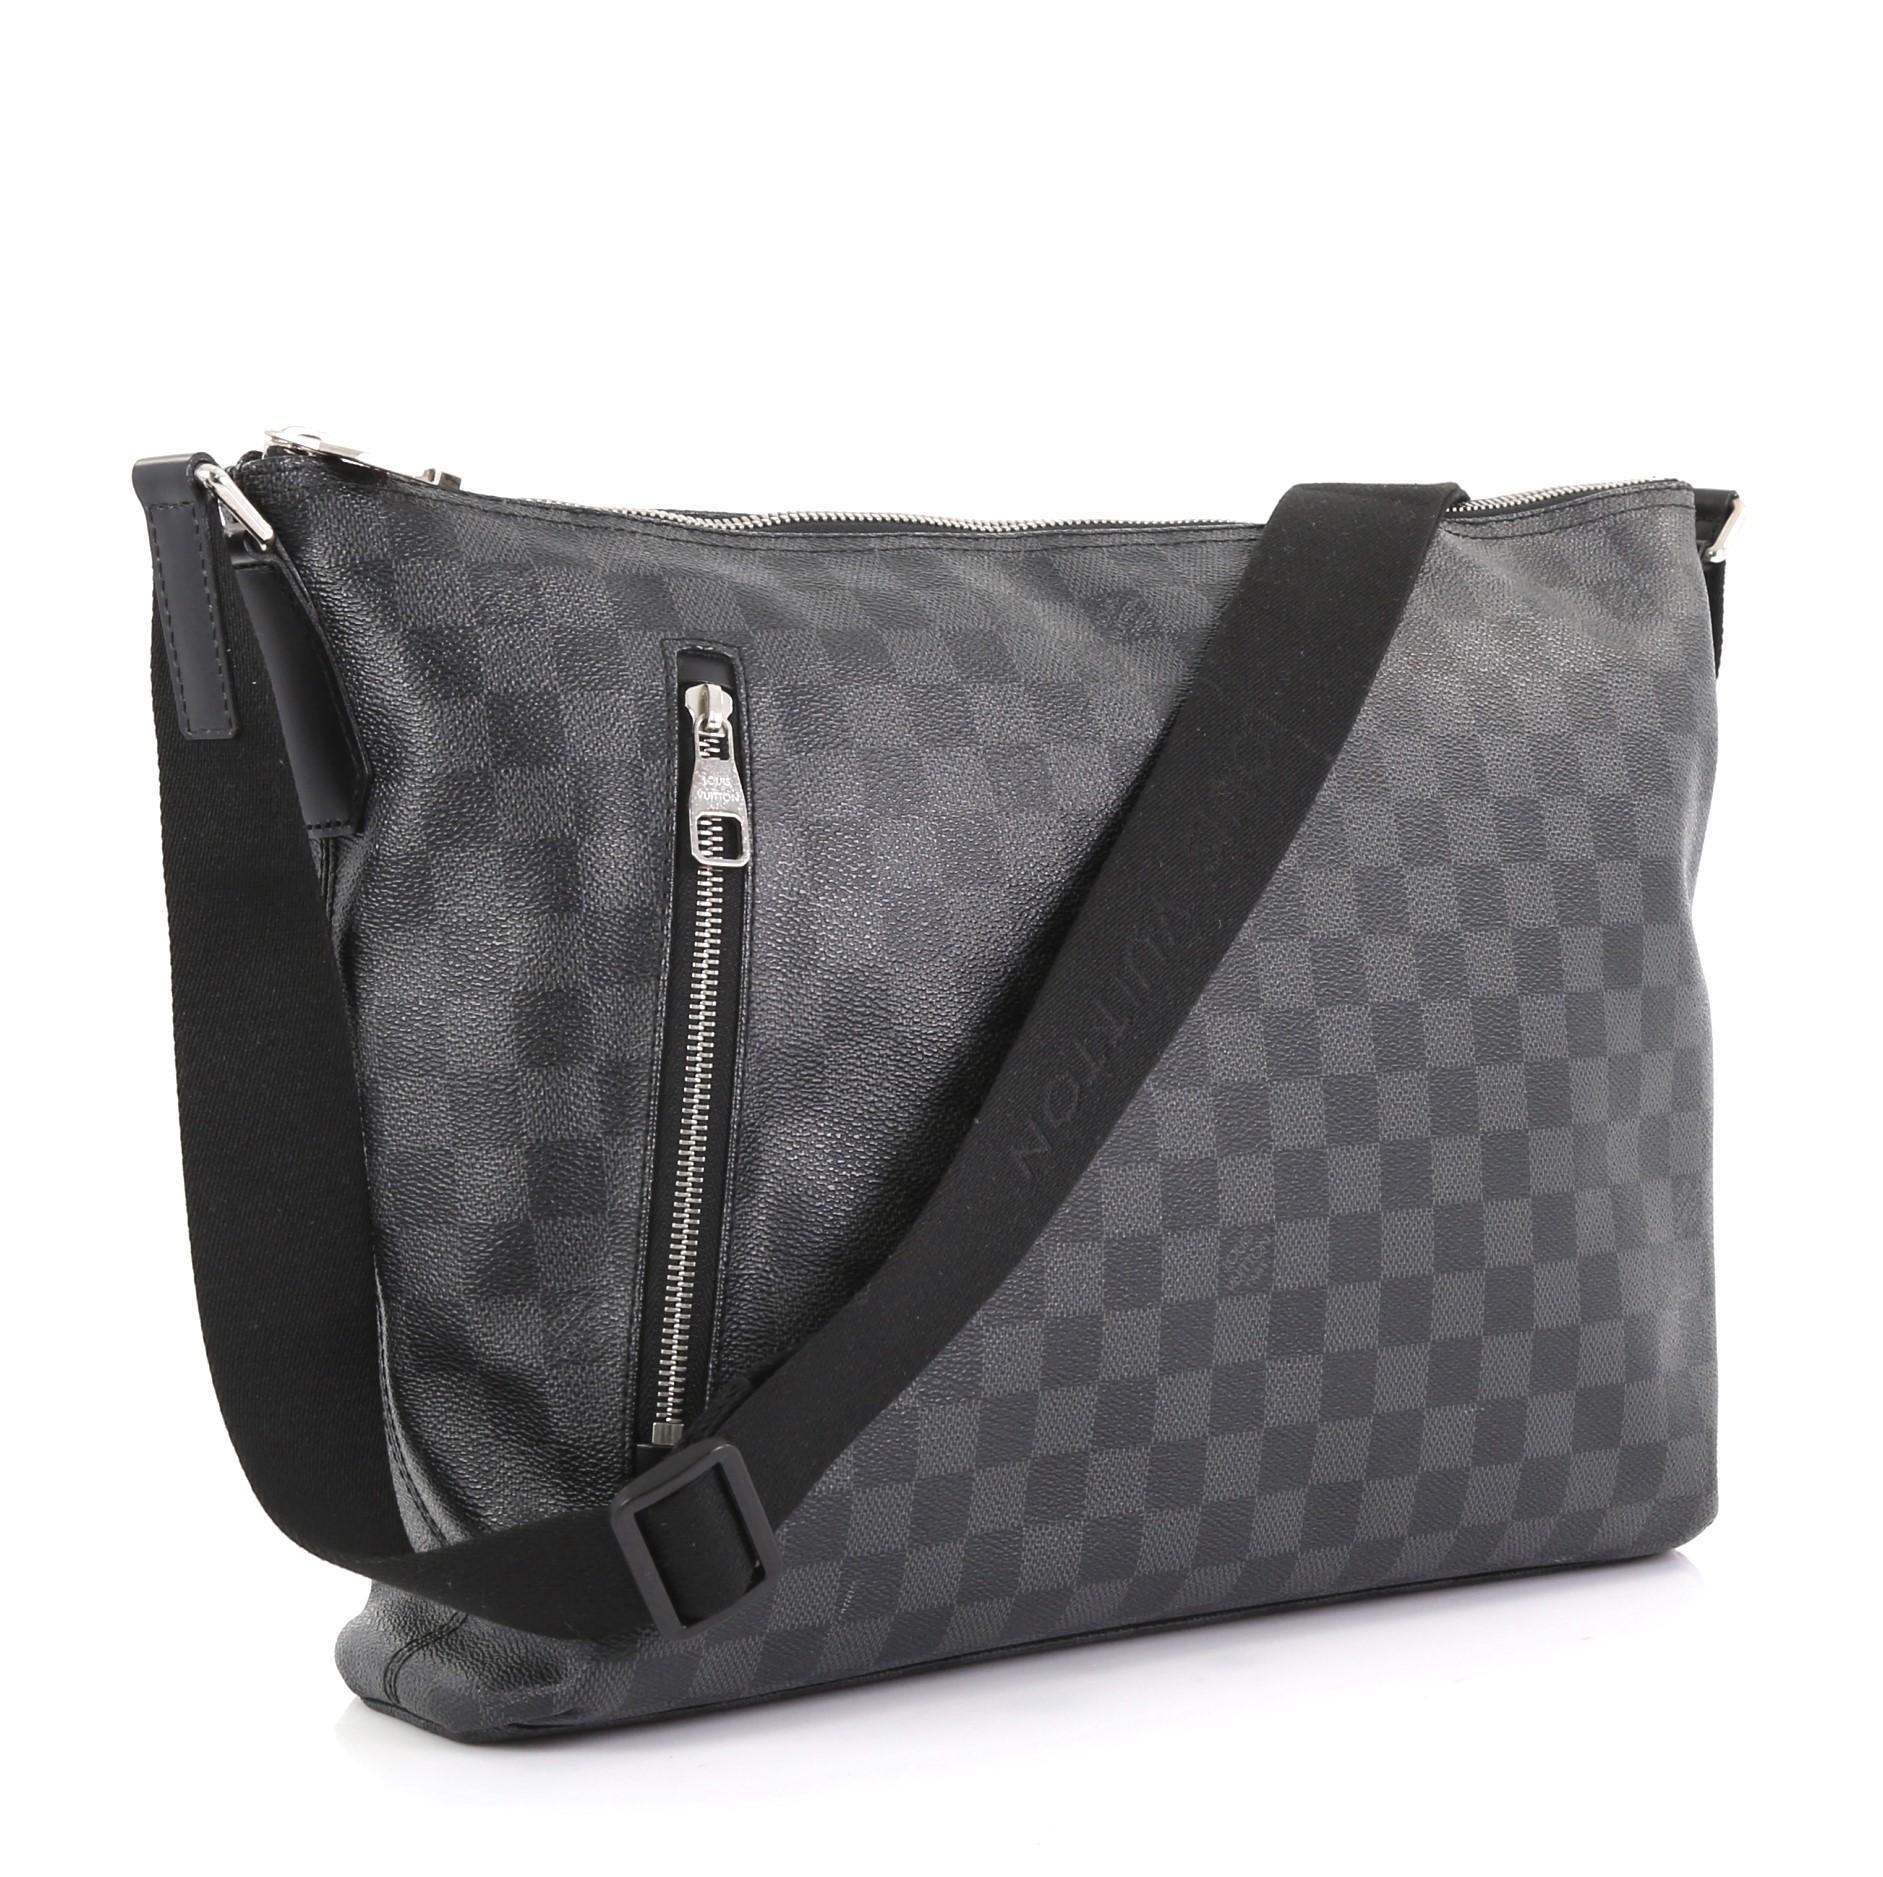 This Louis Vuitton Mick Handbag Damier Graphite MM, crafted from damier graphite coated canvas, features an adjustable shoulder strap, leather trim, exterior zip pockets, and silver-tone hardware. Its zip closure opens to black fabric interior with